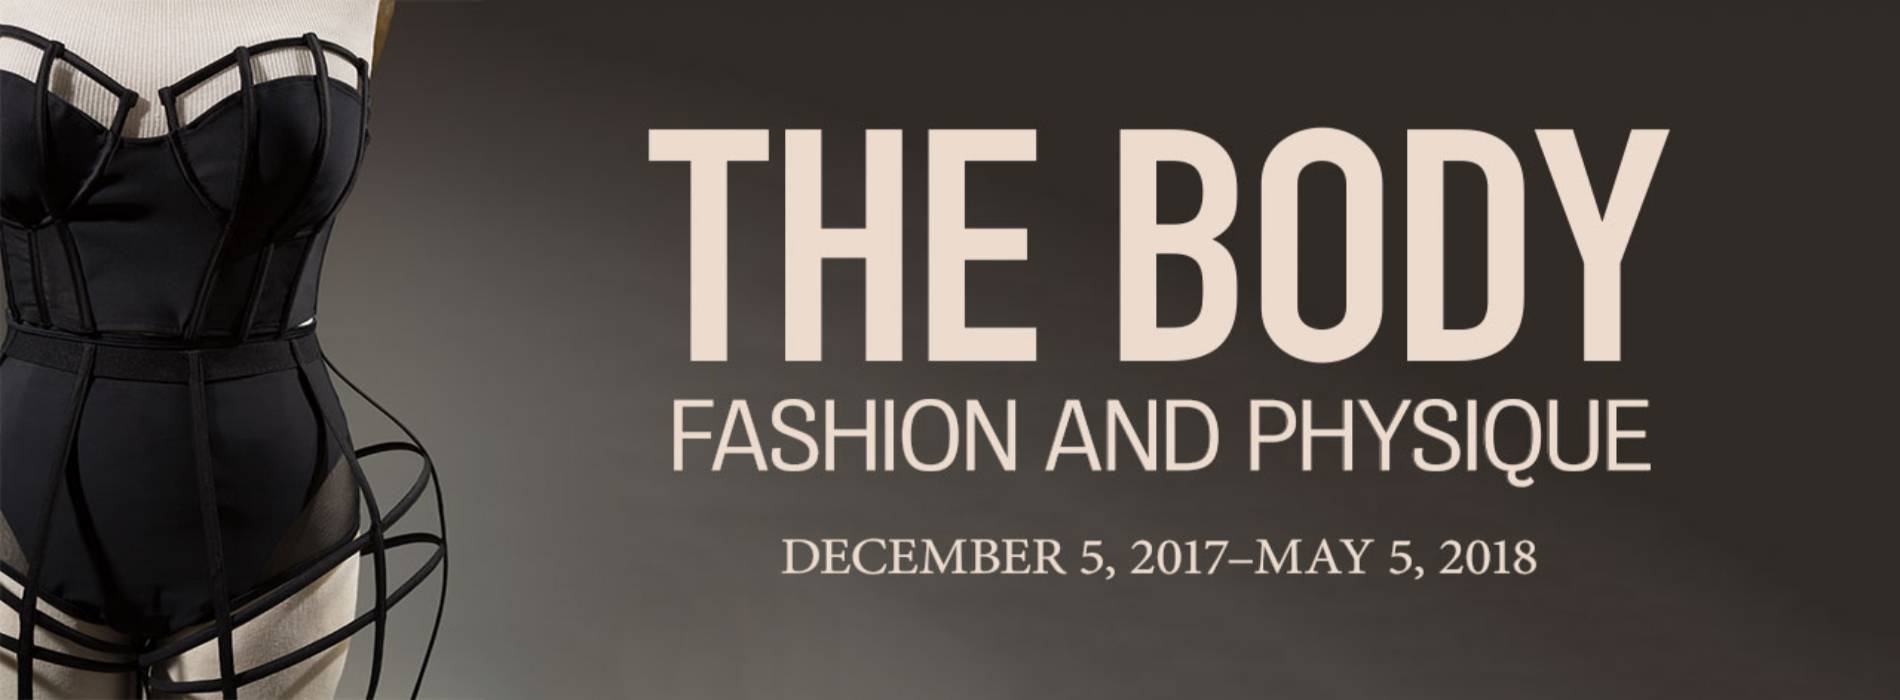 The Body: Fashion and Physique Banner